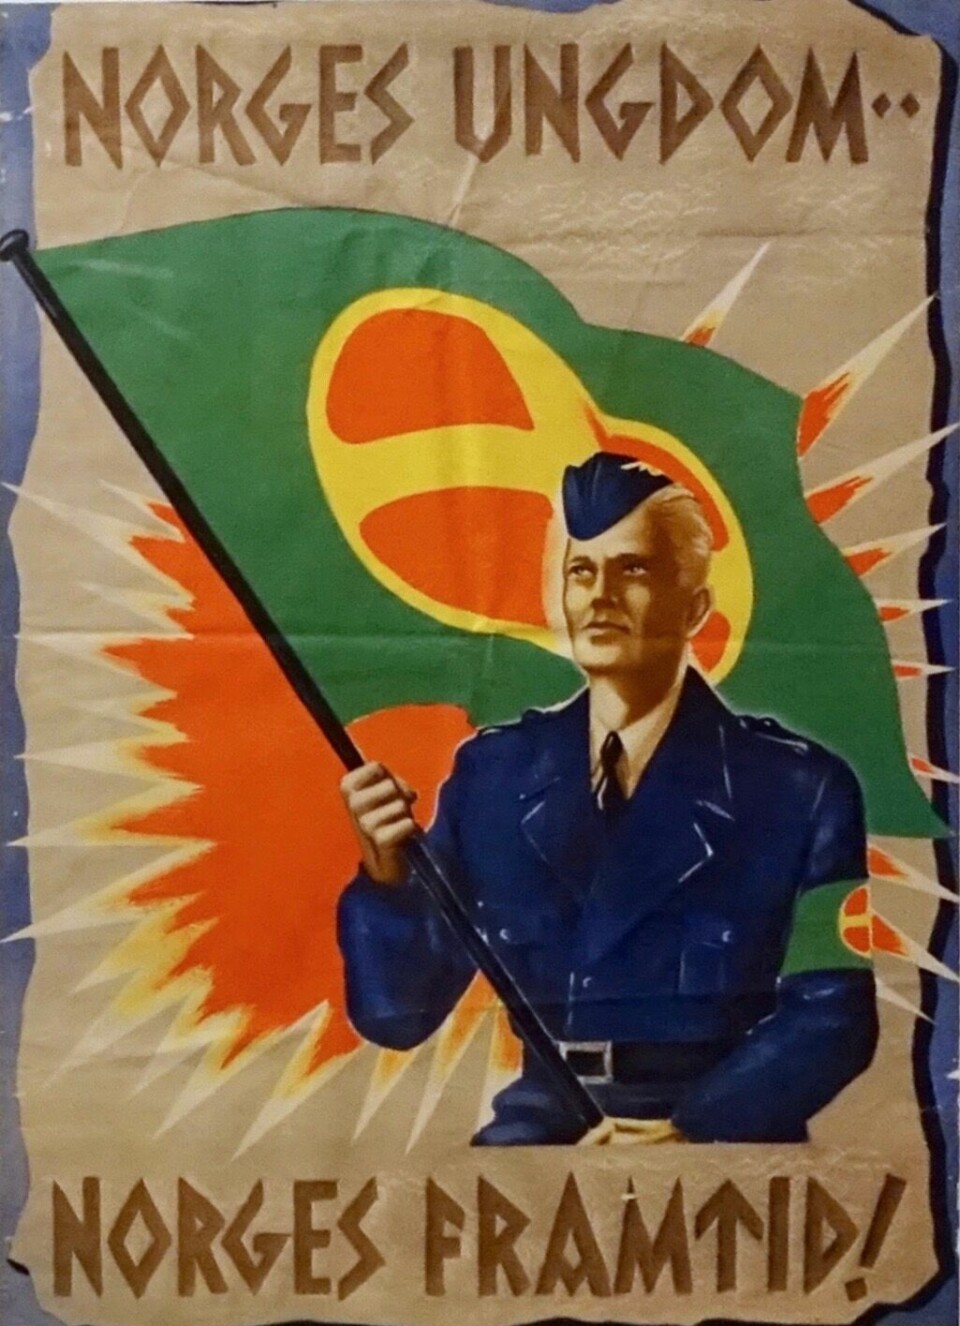 A propaganda poster promoting Quisling’s Nazi-oriented youth group for Norwegian children, the NSUF.